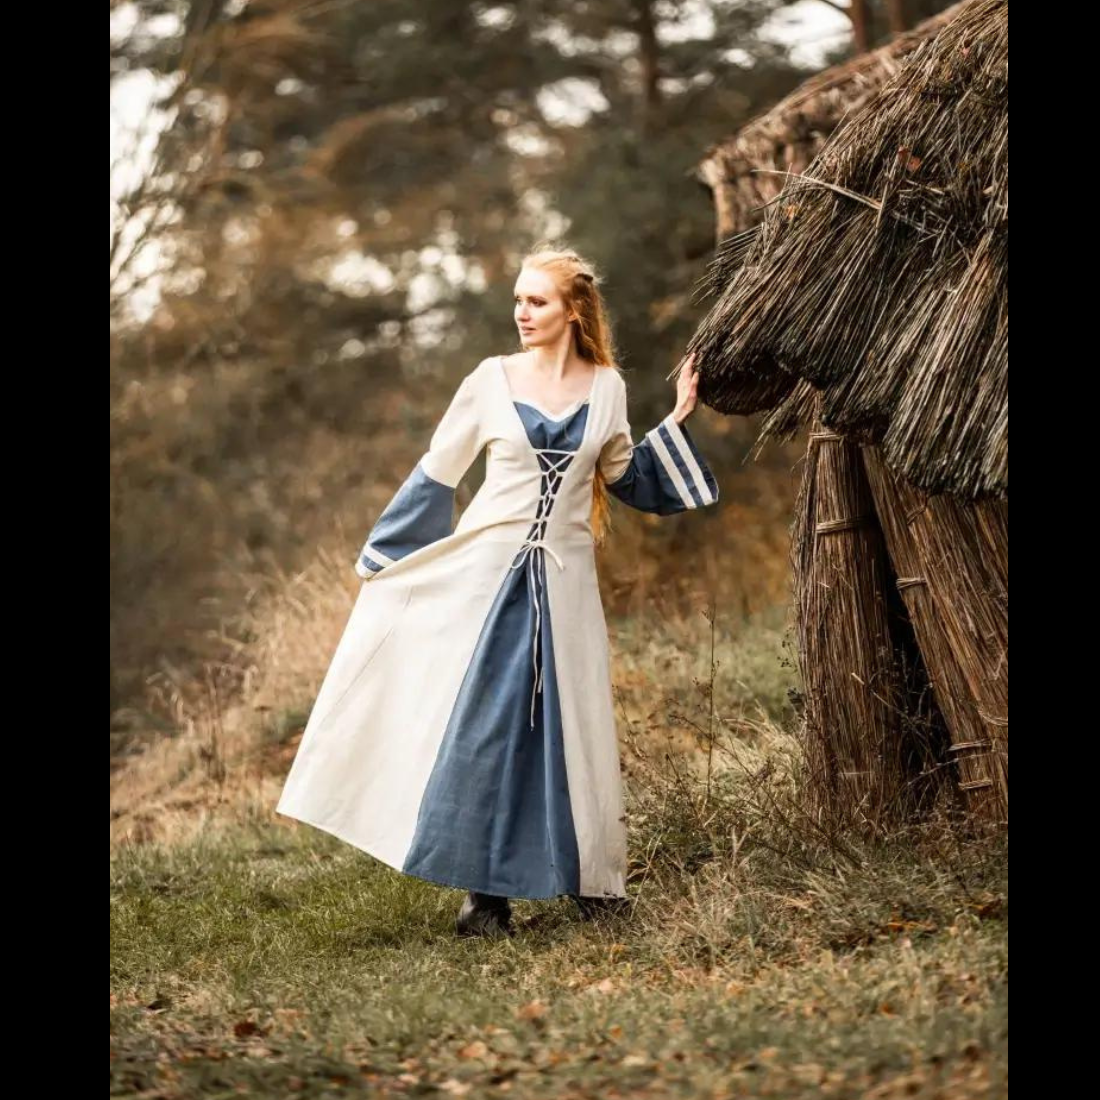 Renaissance Style Dress - Exquisite Long Sleeves in Natural and Blue, Featuring Traditional Lacing